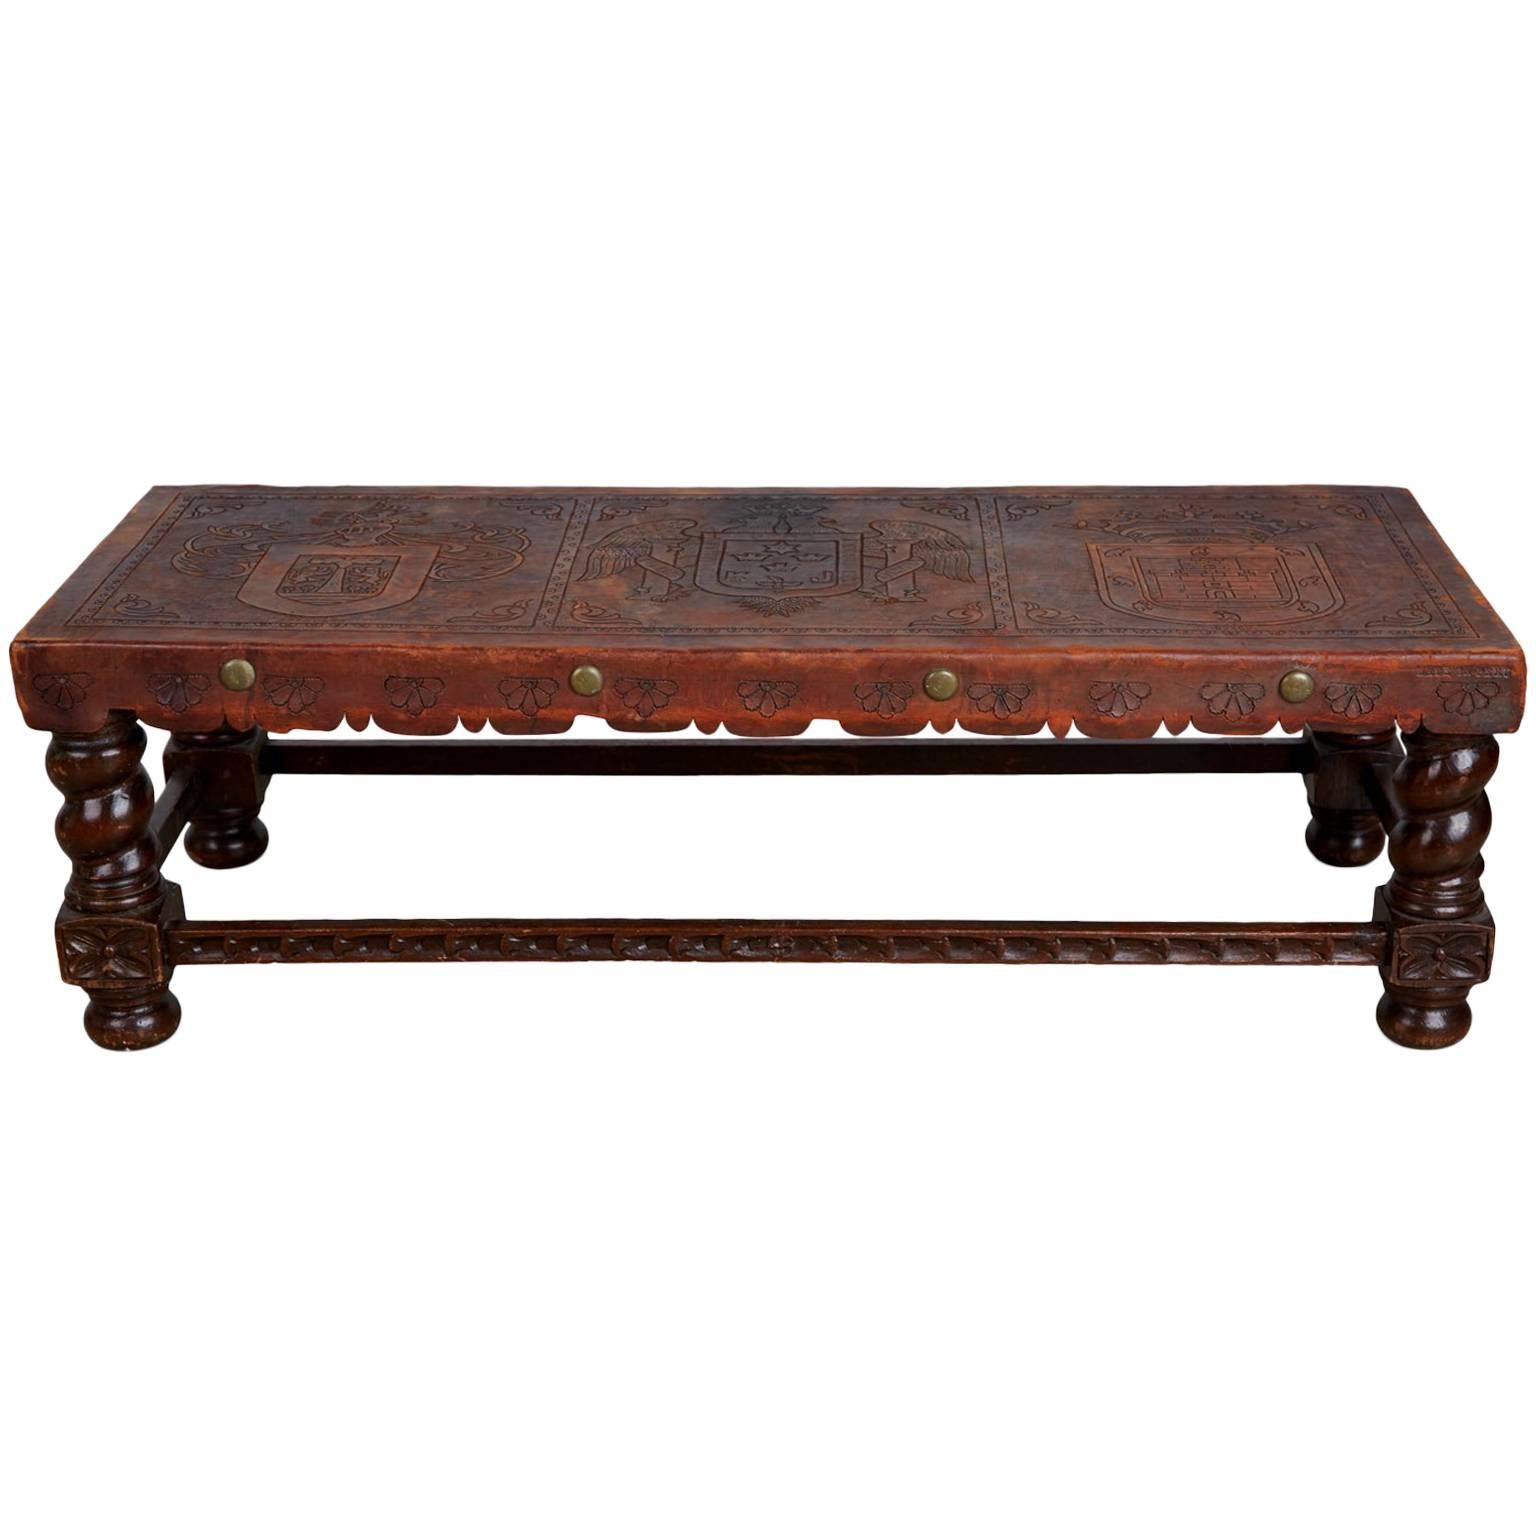 Tooled Leather Peruvian Bench or Coffee Table